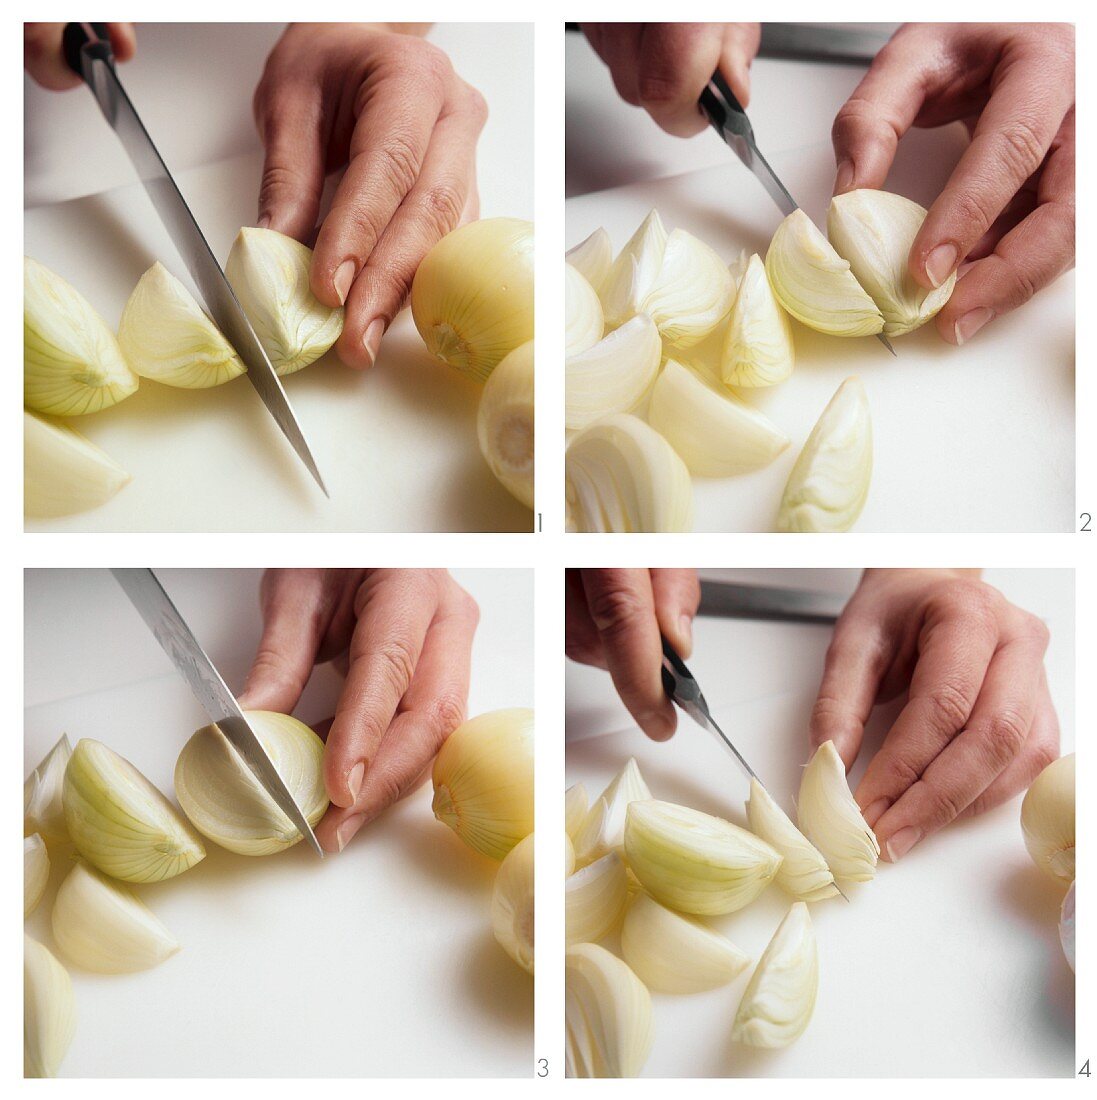 Cutting onion into wedges